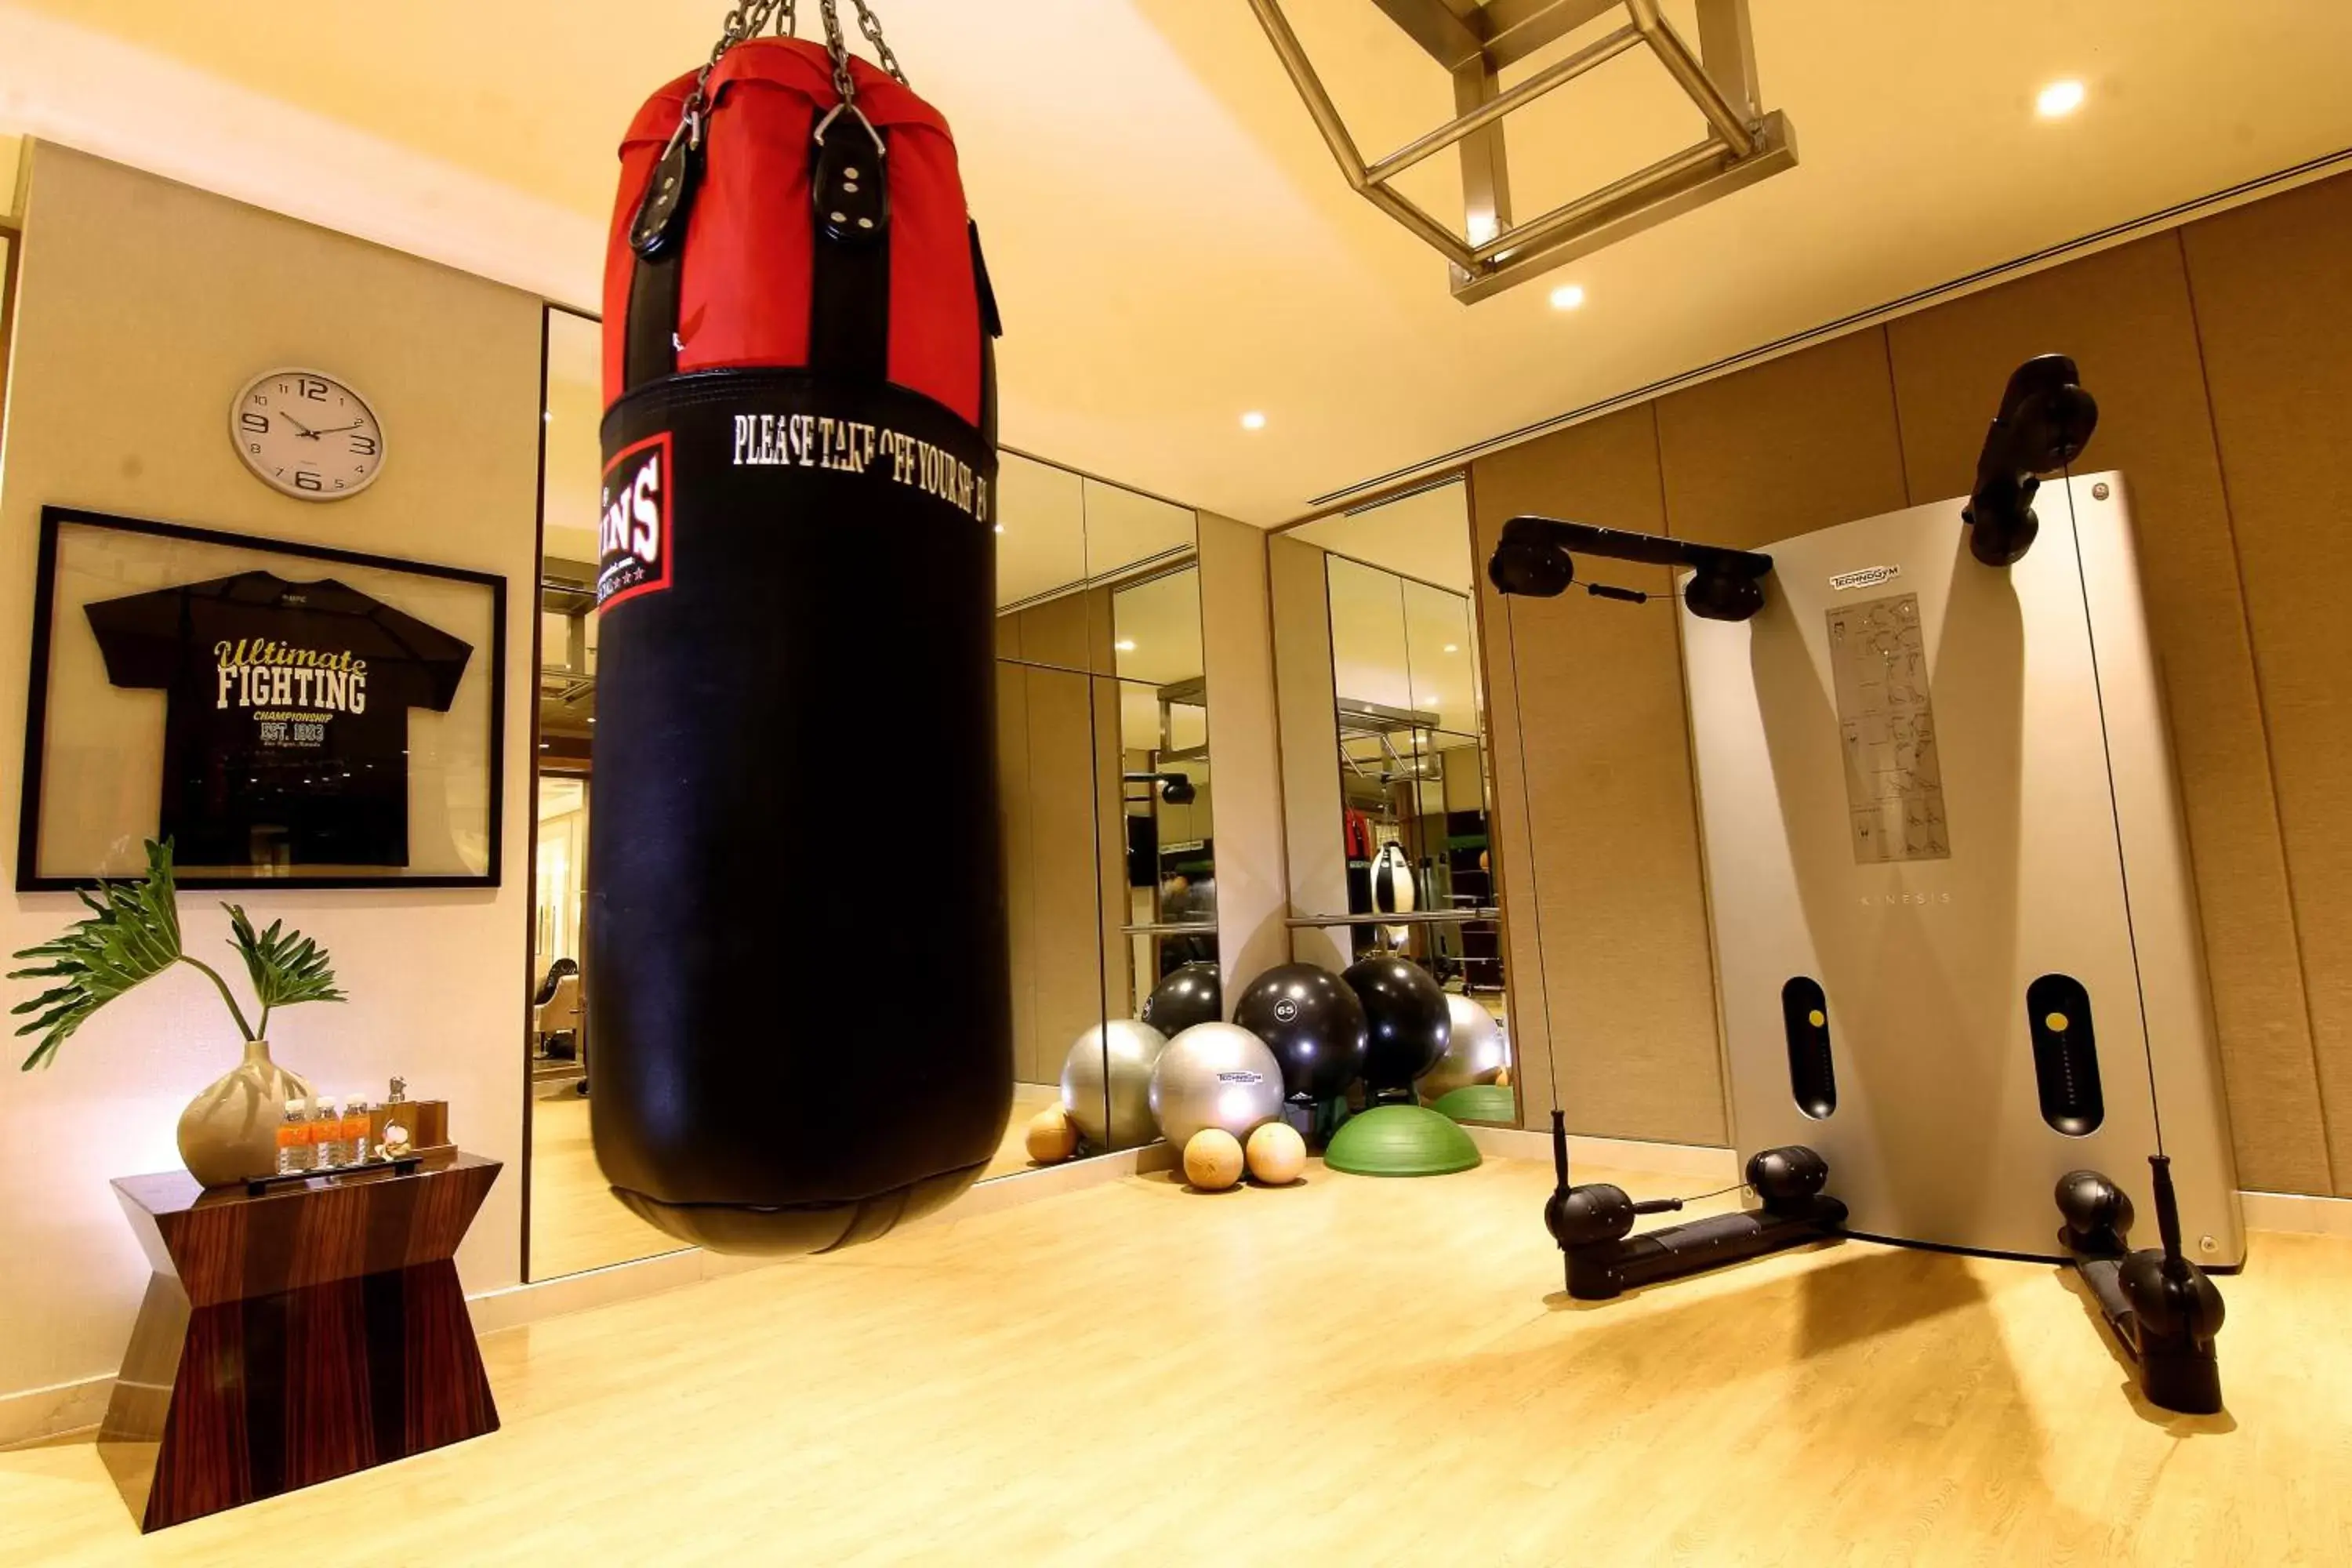 Fitness centre/facilities, Fitness Center/Facilities in Solaire Resort Entertainment City